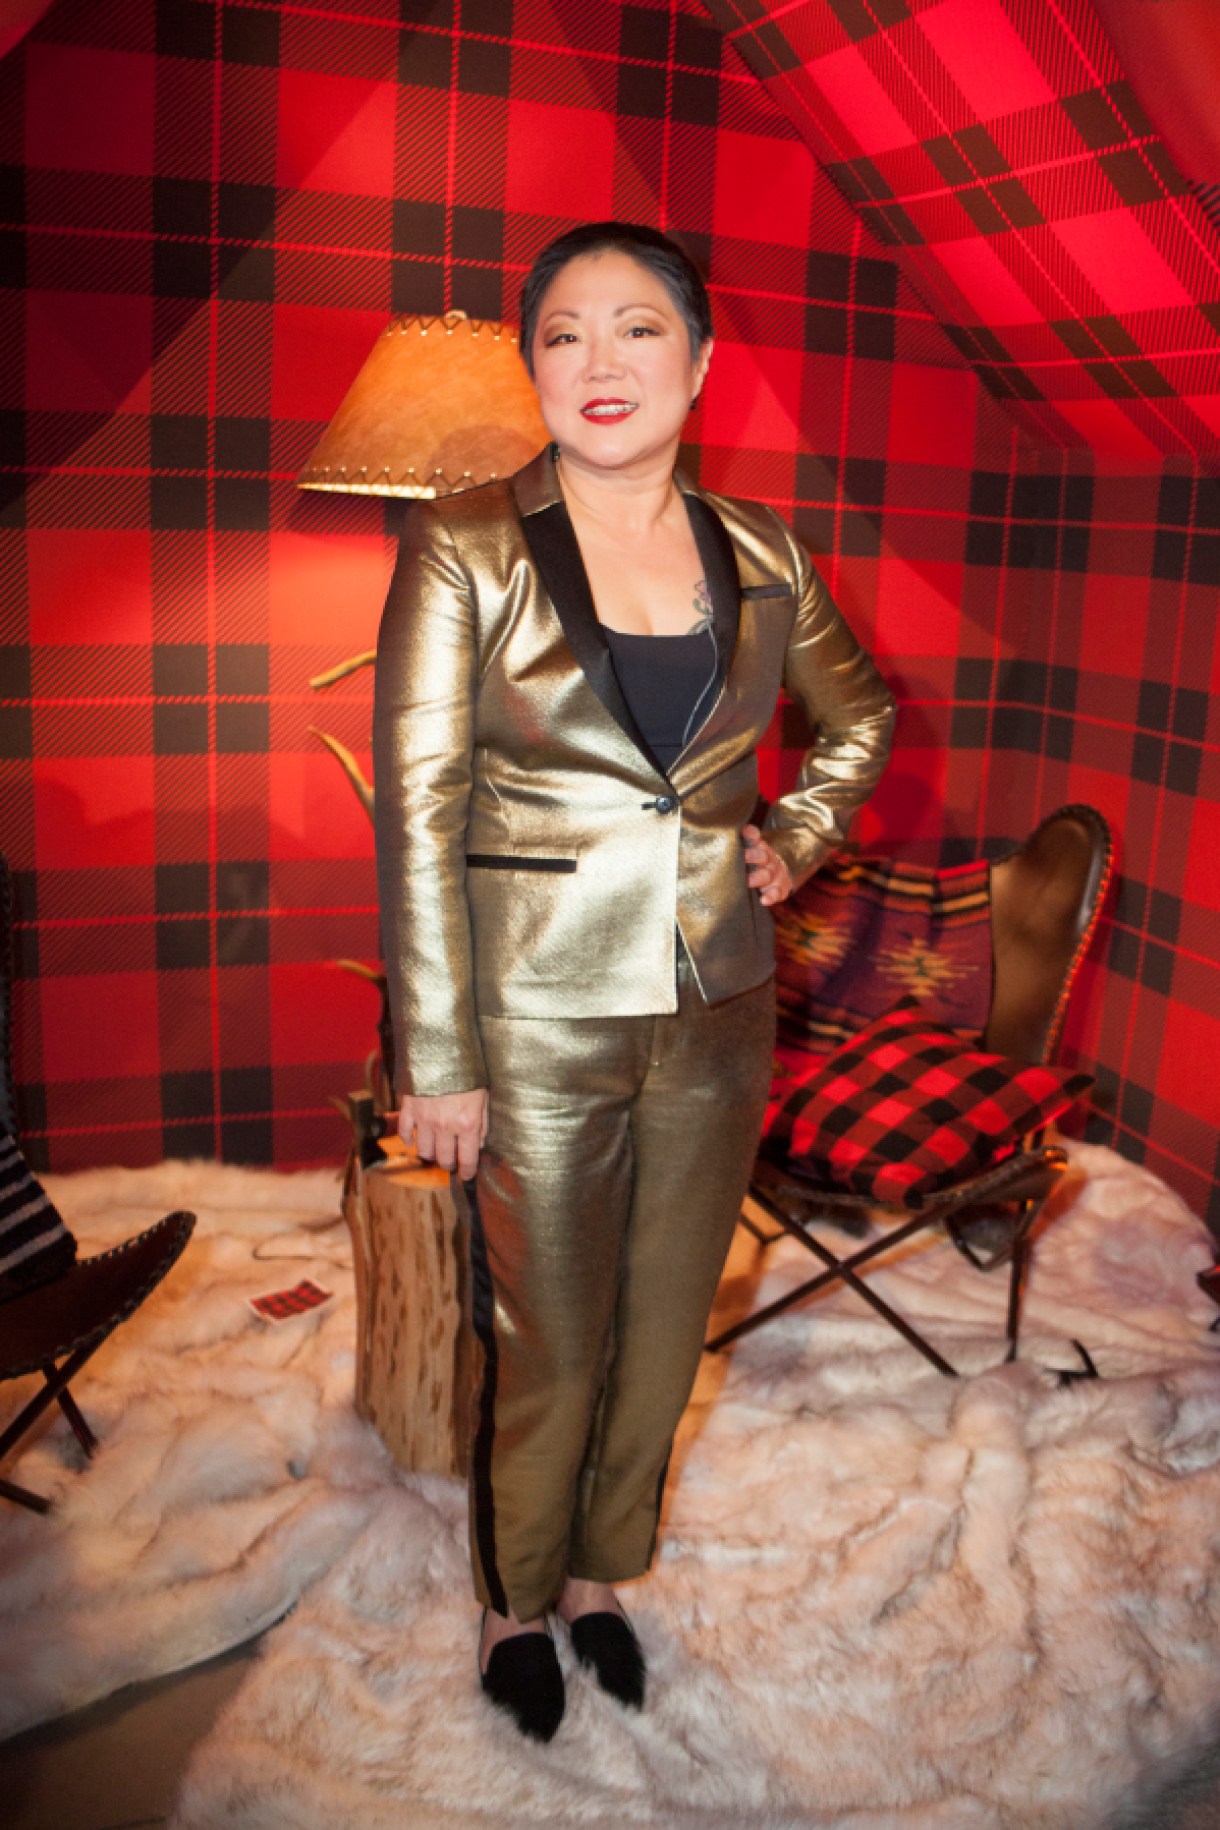 ASPEN, CO - JANUARY 23:  Margaret Cho attends the Logo New Now Next Honors From Aspen Gay Ski Week on January 23, 2016 in Aspen, Colorado.  (Photo by Santiago Felipe/Getty Images for Logo)